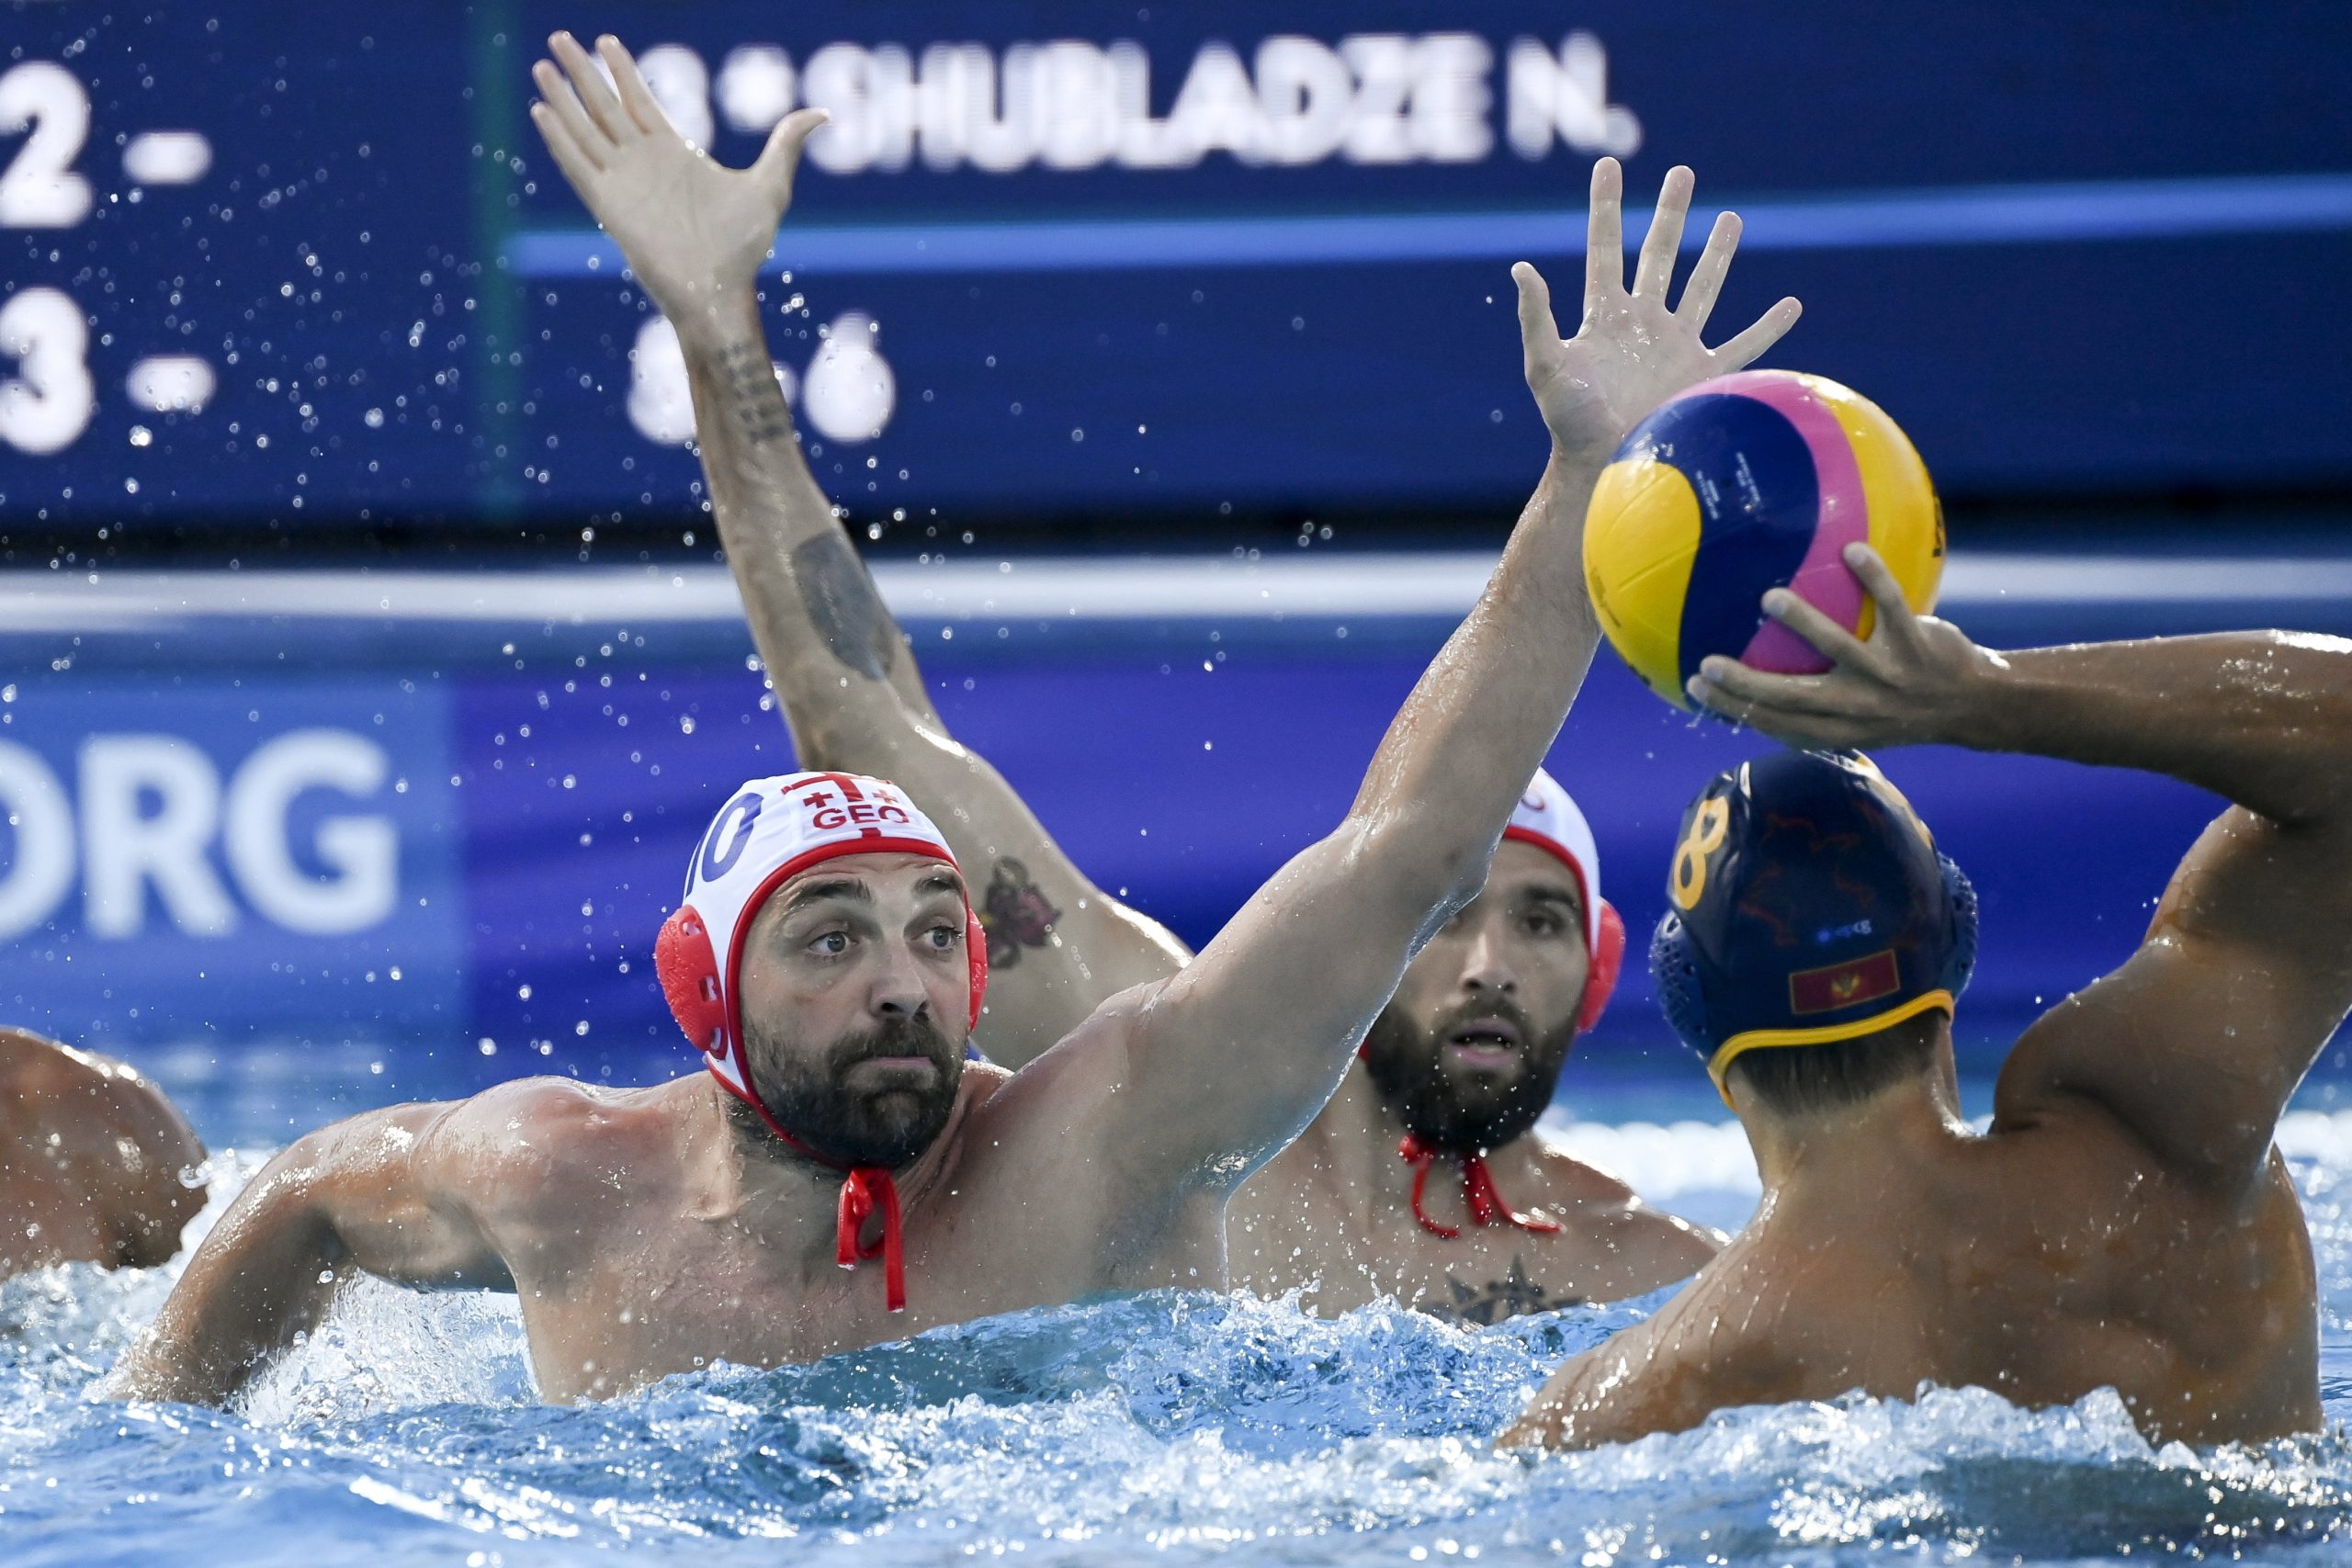 Montenegro wins the Hungarian group in the men's water polo tournament